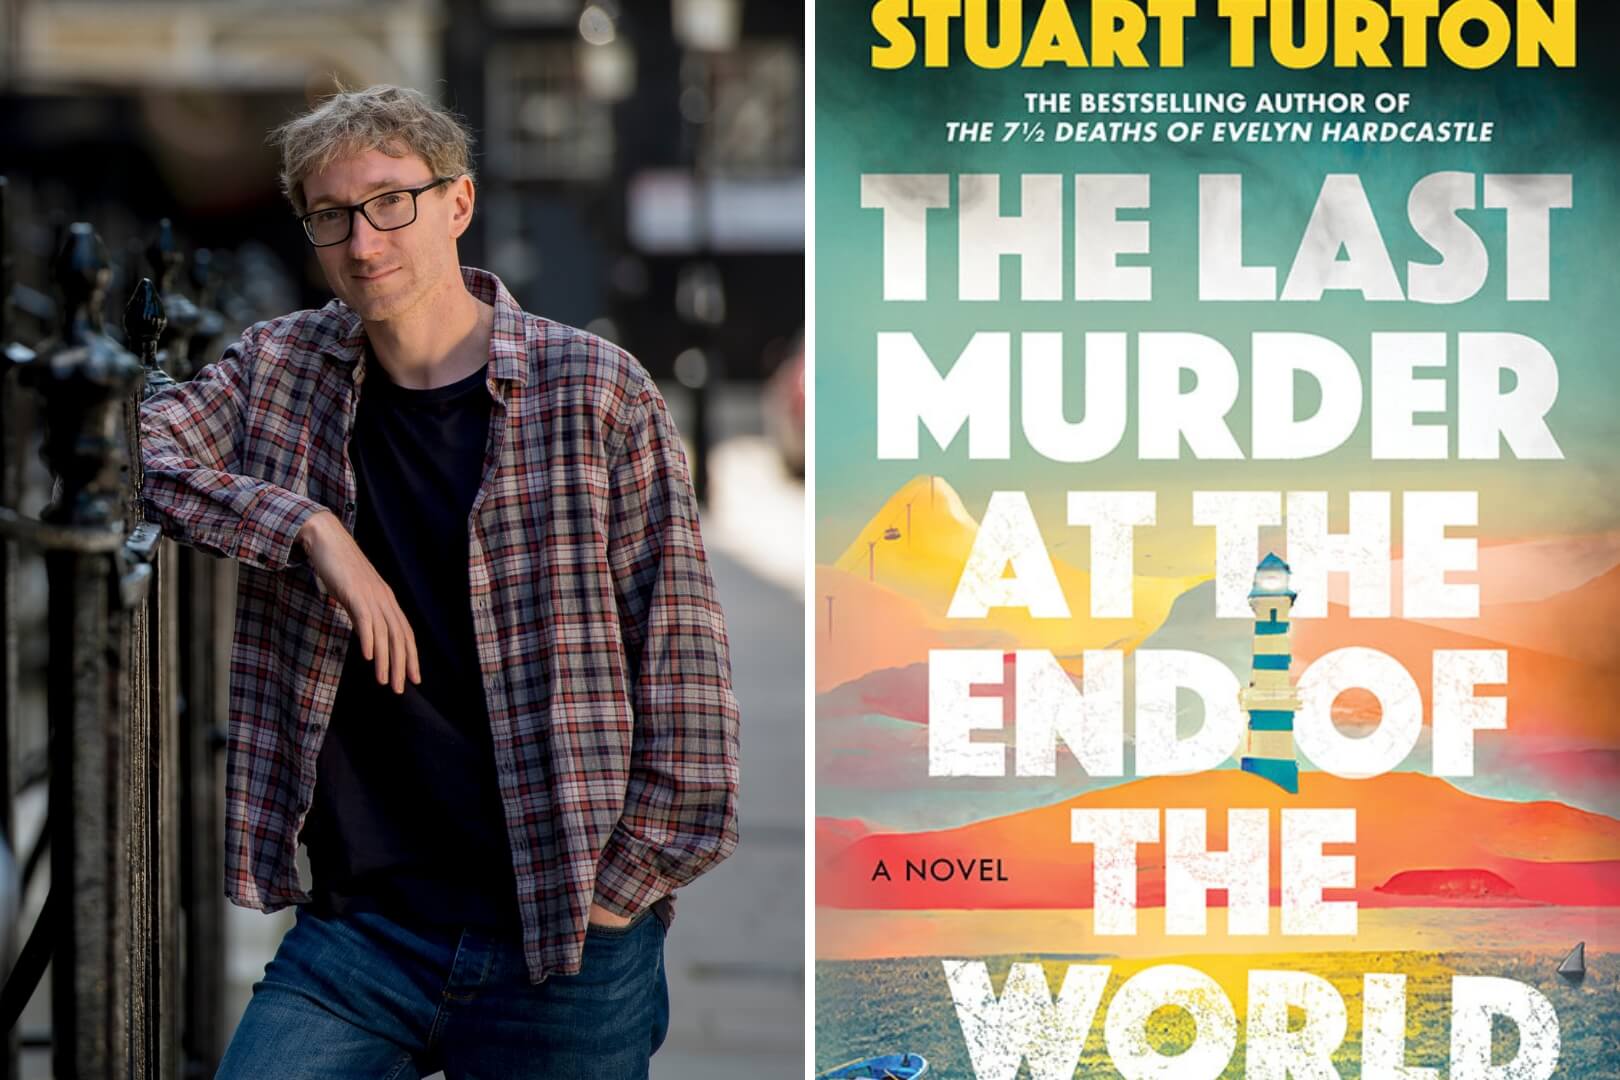 Q&A with Stuart Turton, Author of The Last Murder at the End of the World